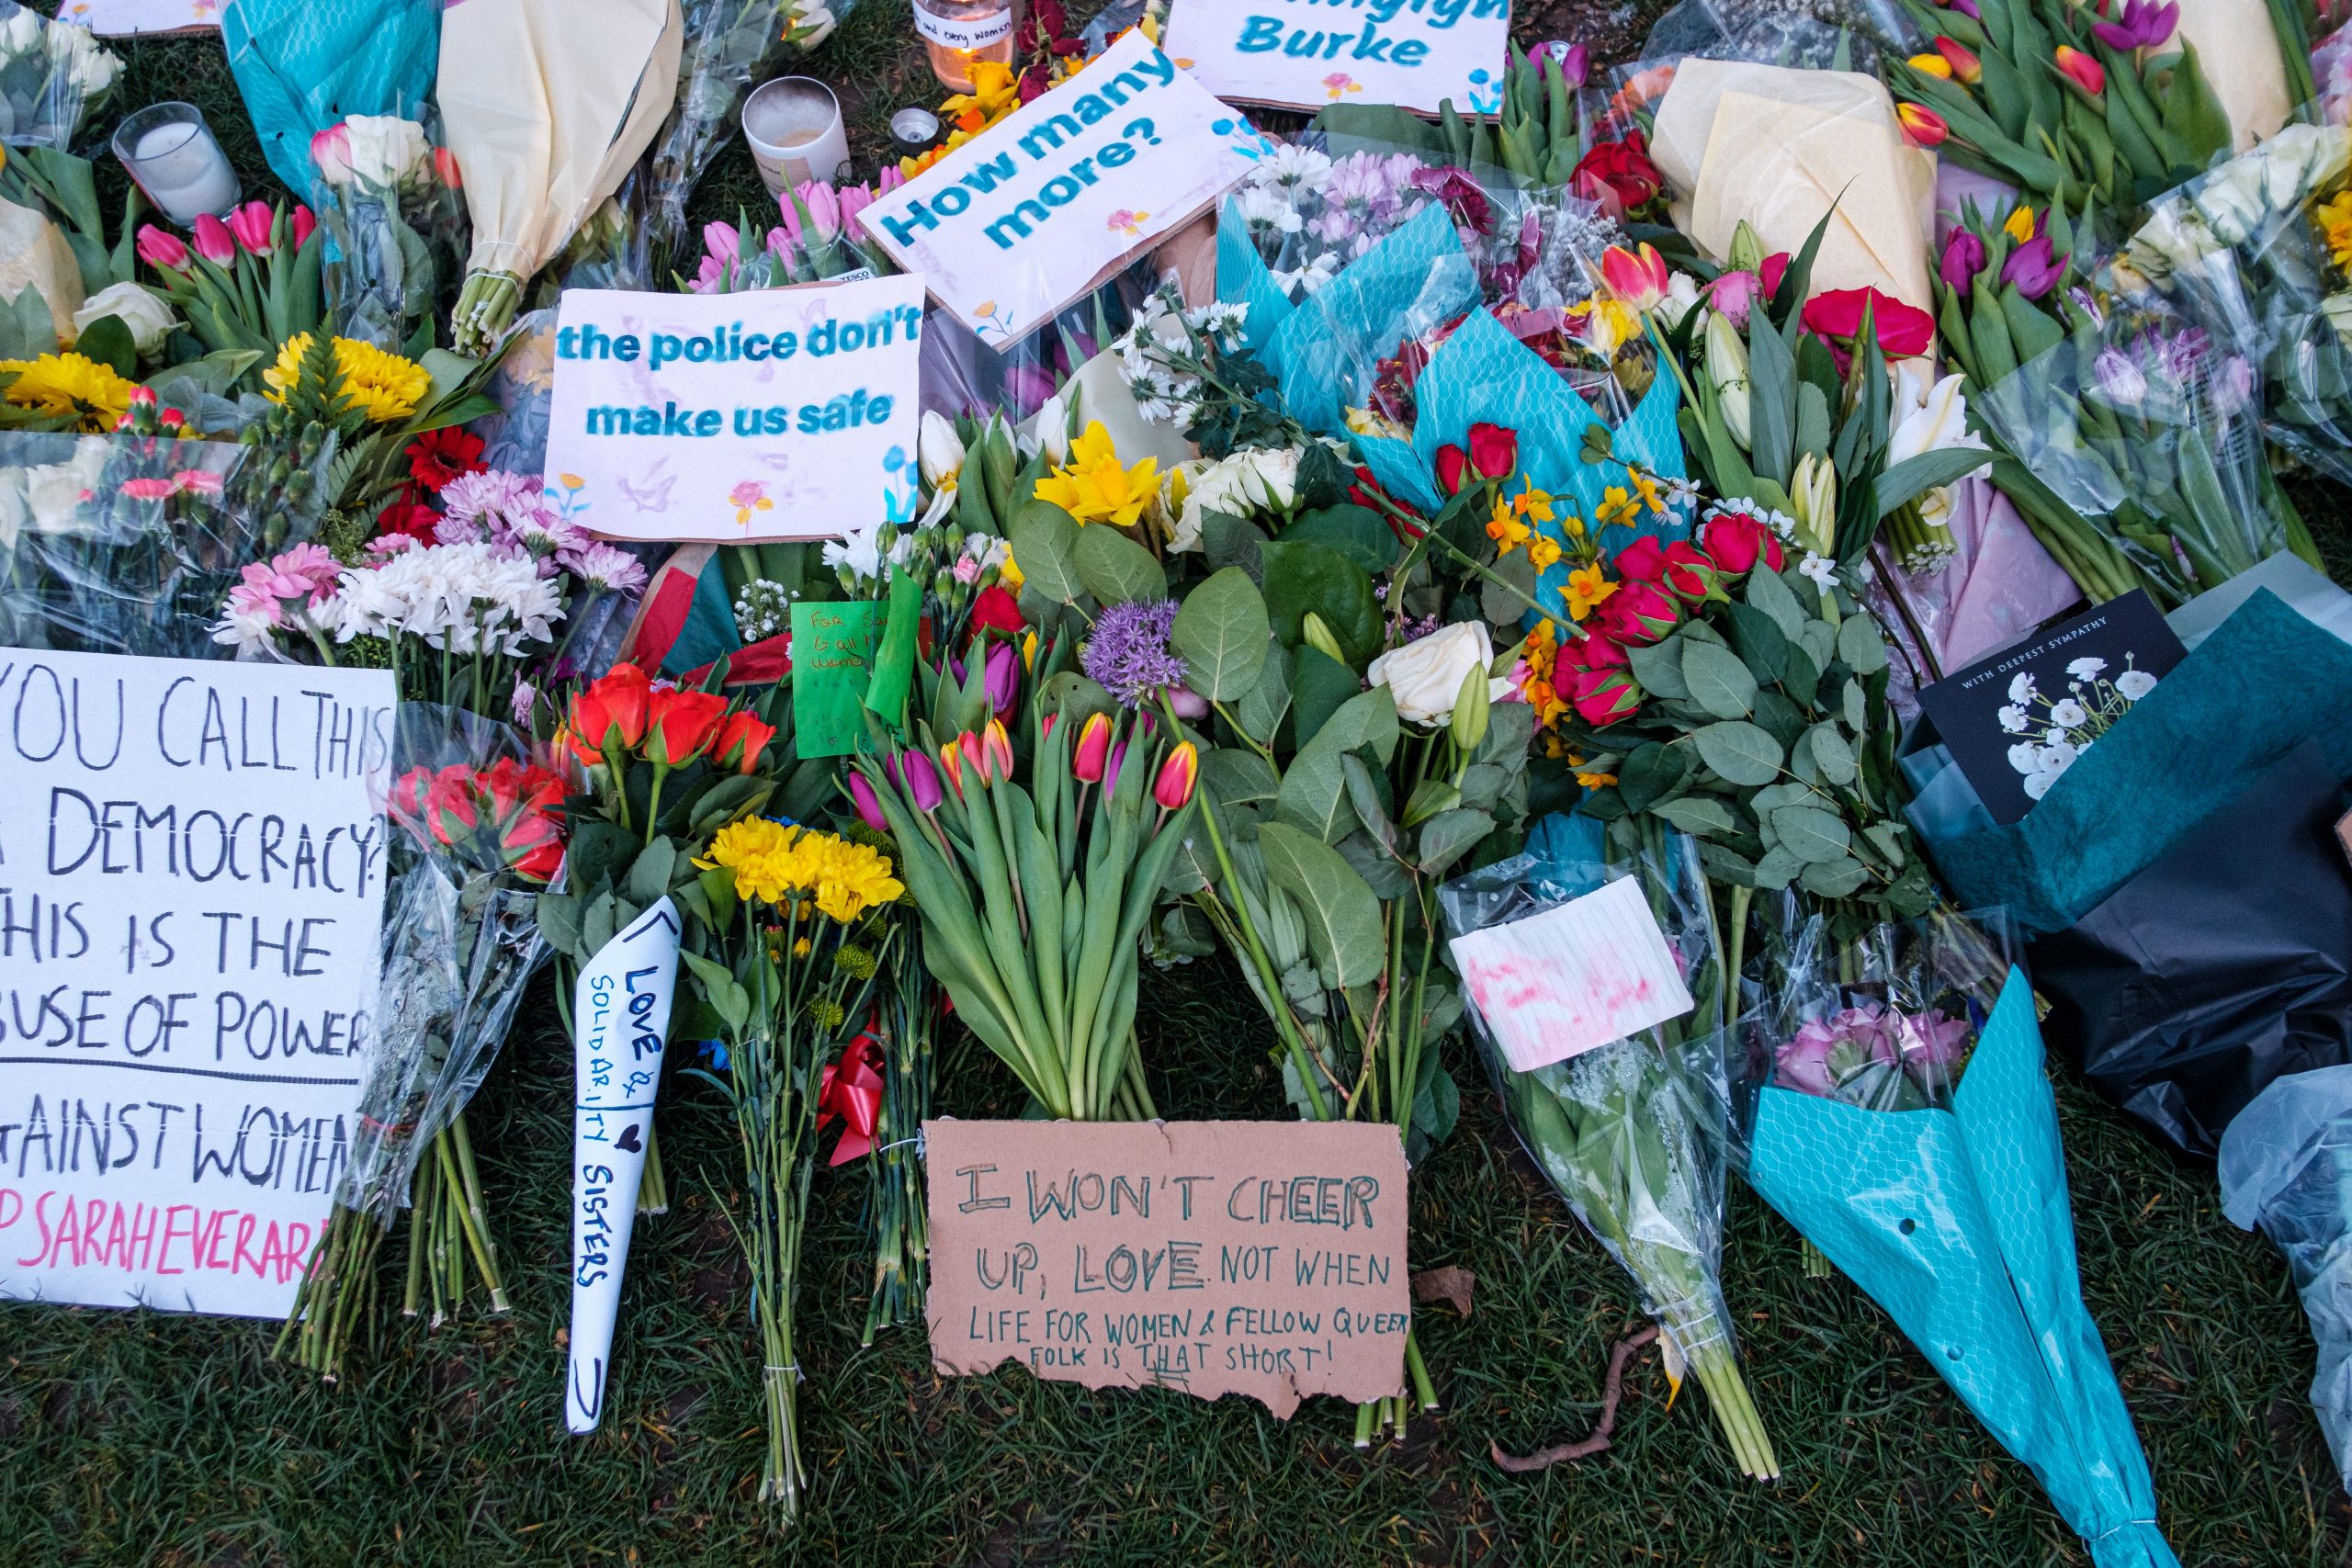 Flowers and protest signs at vigil for Sarah Everard